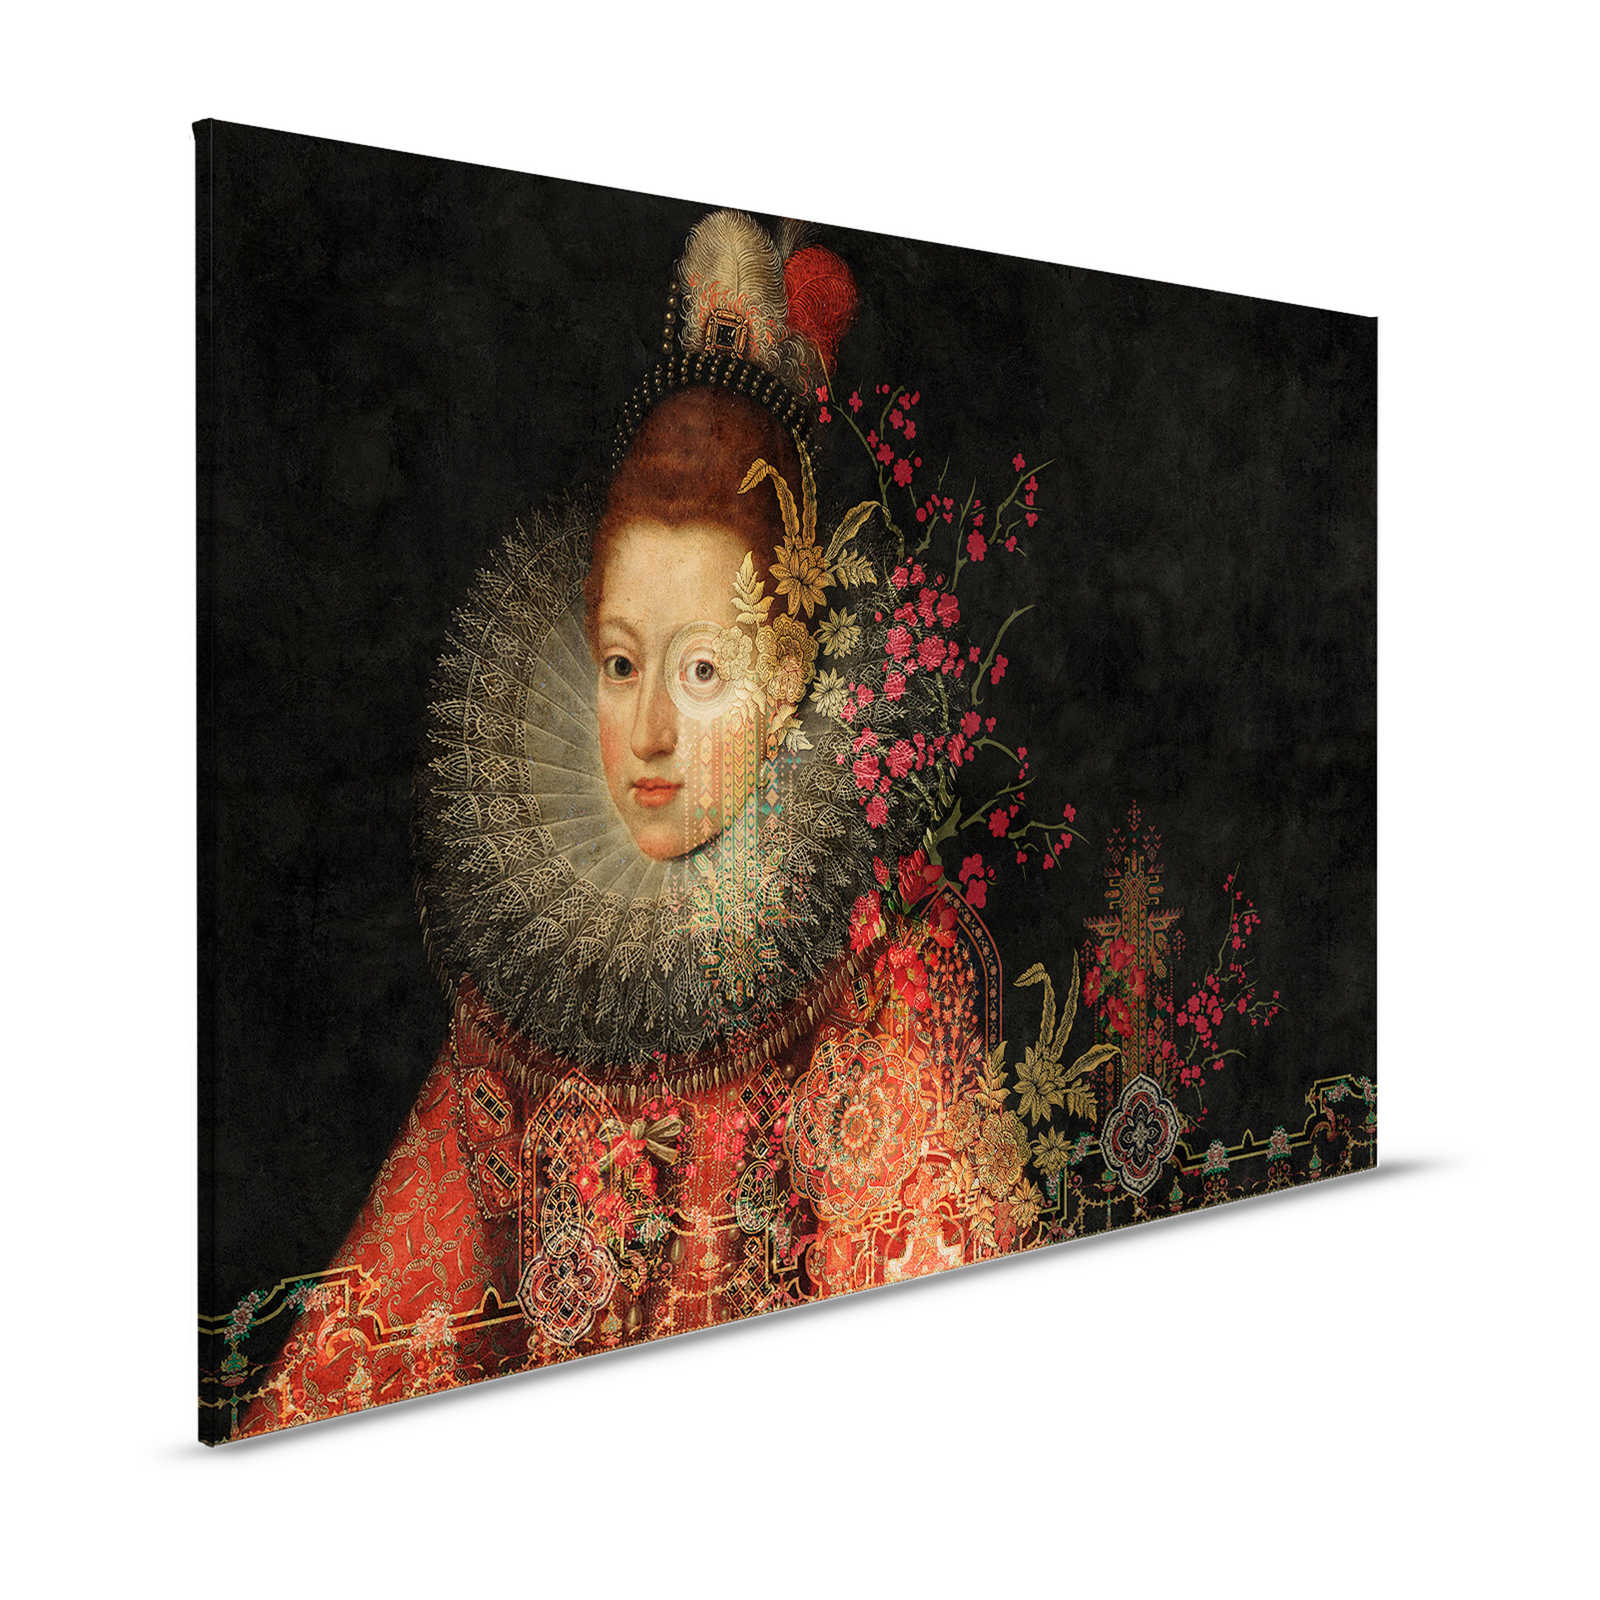 In the Gallery 1 - Canvas painting Classic Paintings & Flowers Graphic - 1,20 m x 0,80 m
